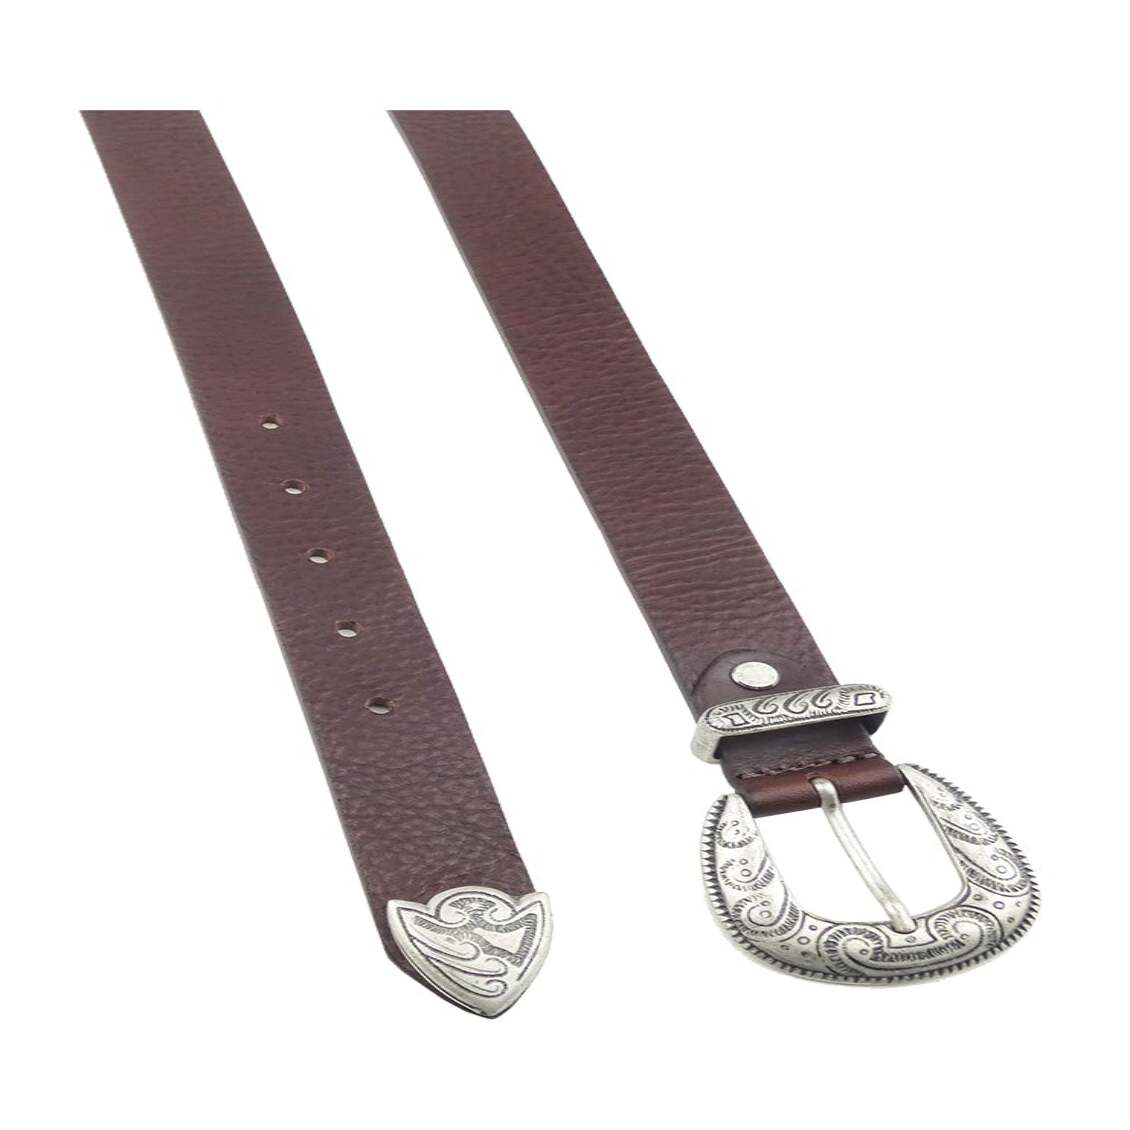 3cm leather belt with silver zamak buckle and loop - Picasso